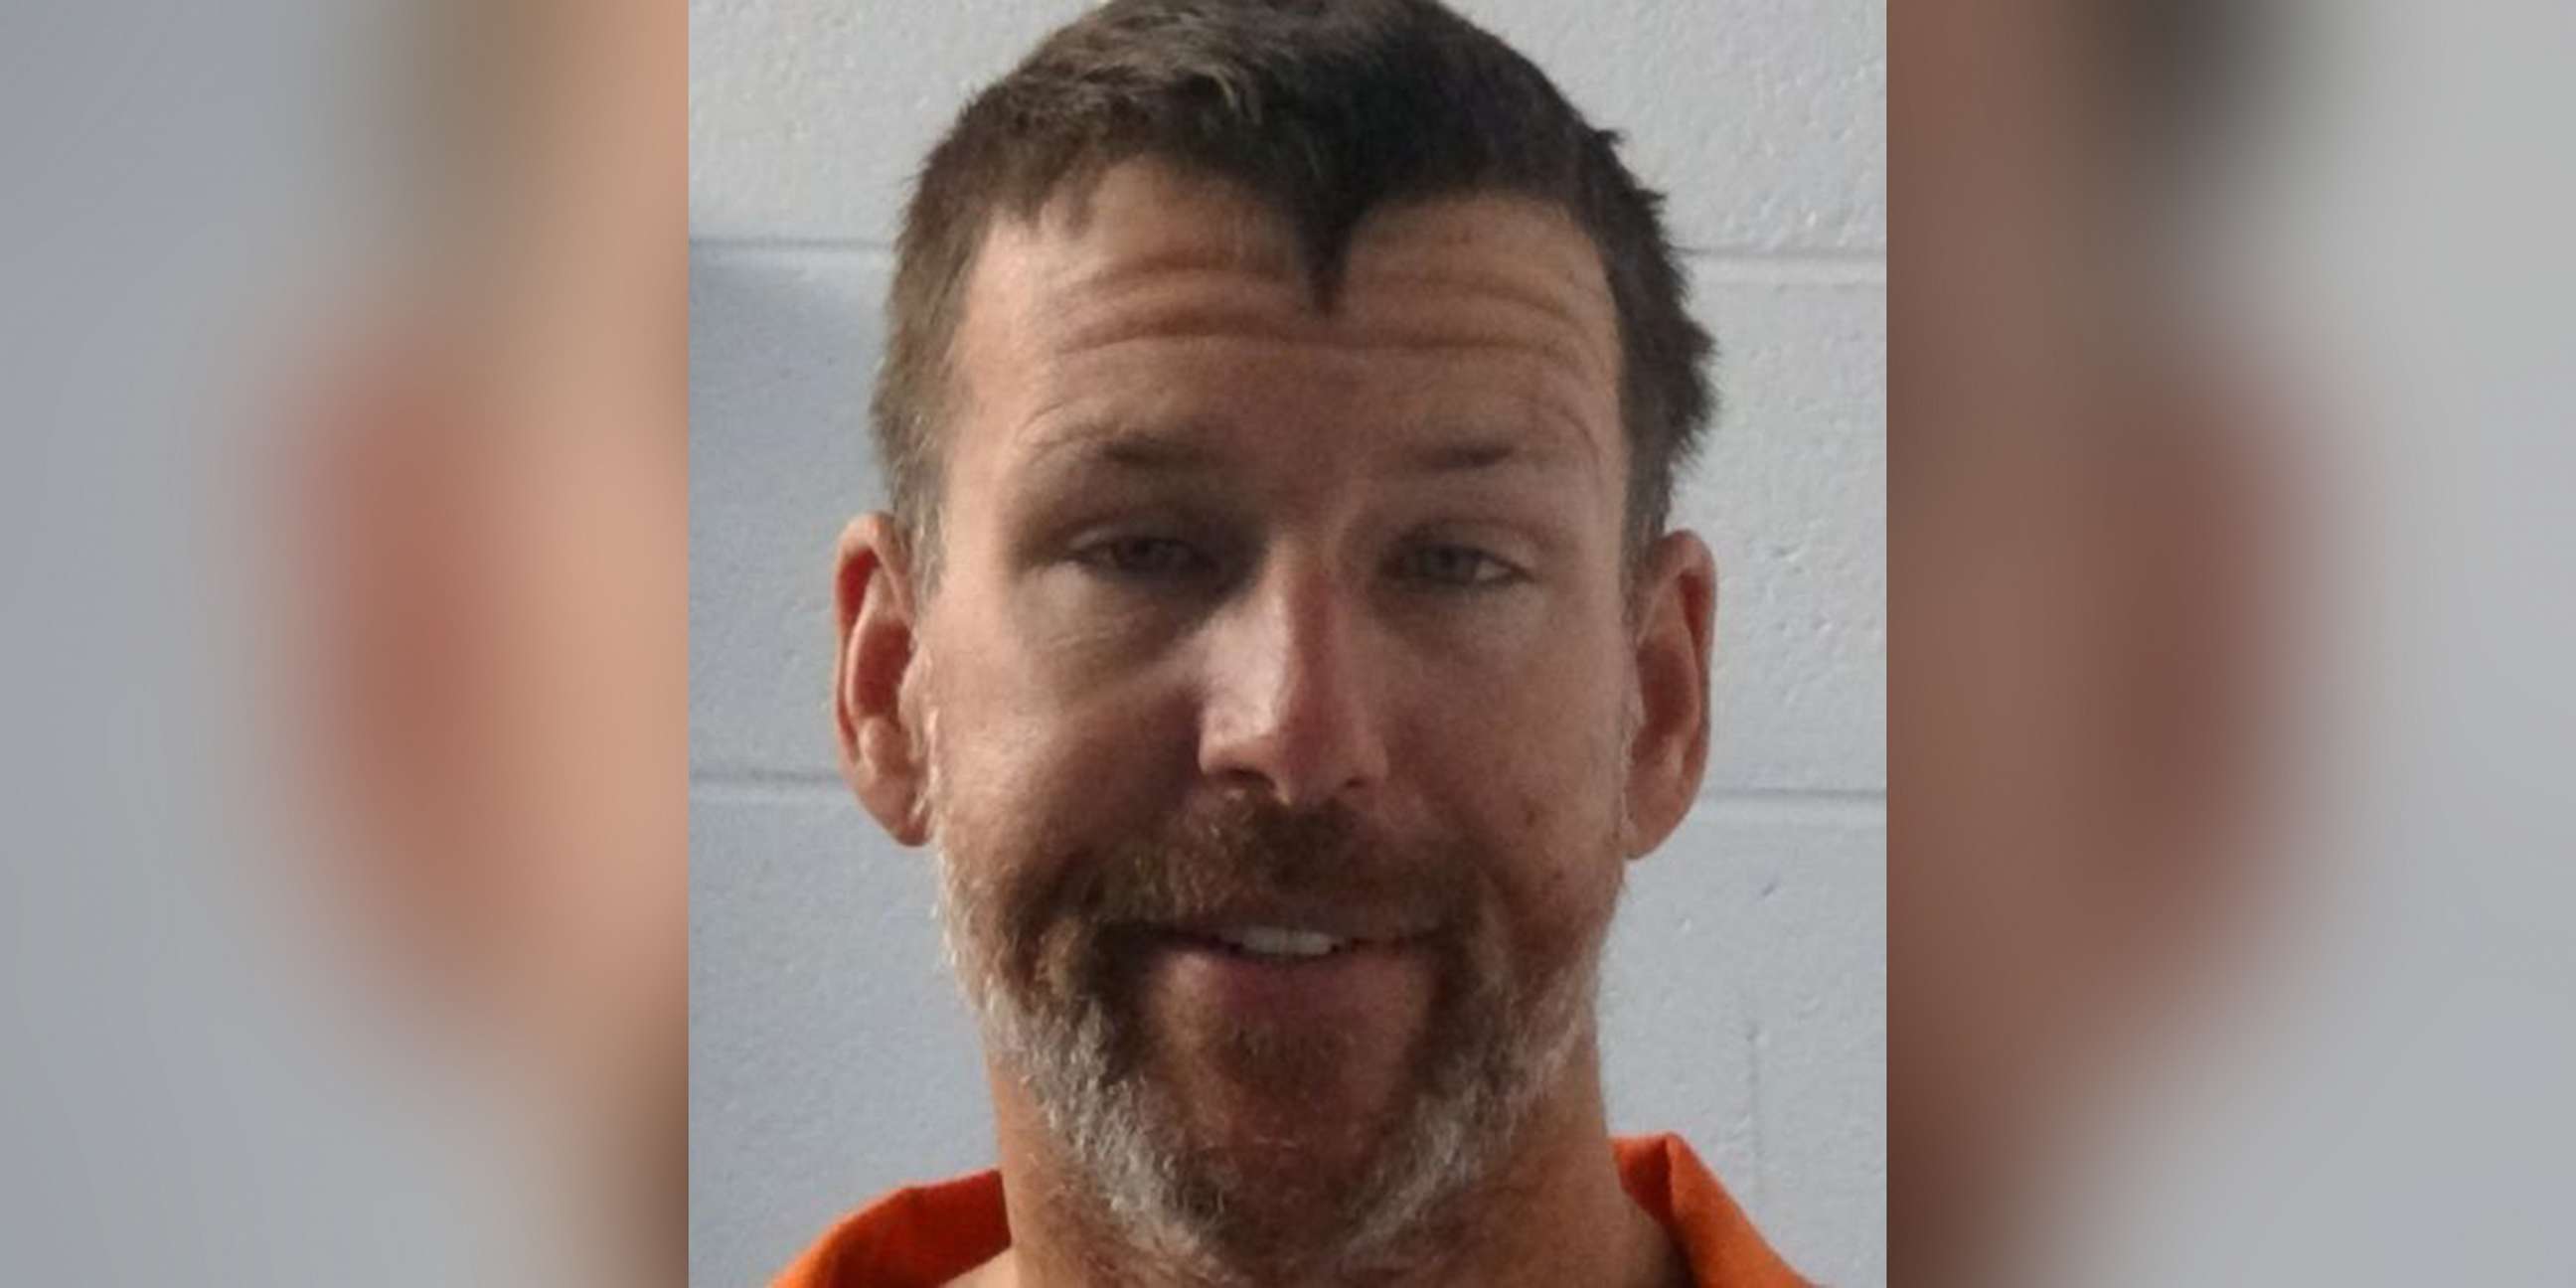 PHOTO: David E. Anthony, 44, was arrested in New Mexico for the disappearance and murder of his wife Gretchen Anthony, March 21, 2020.